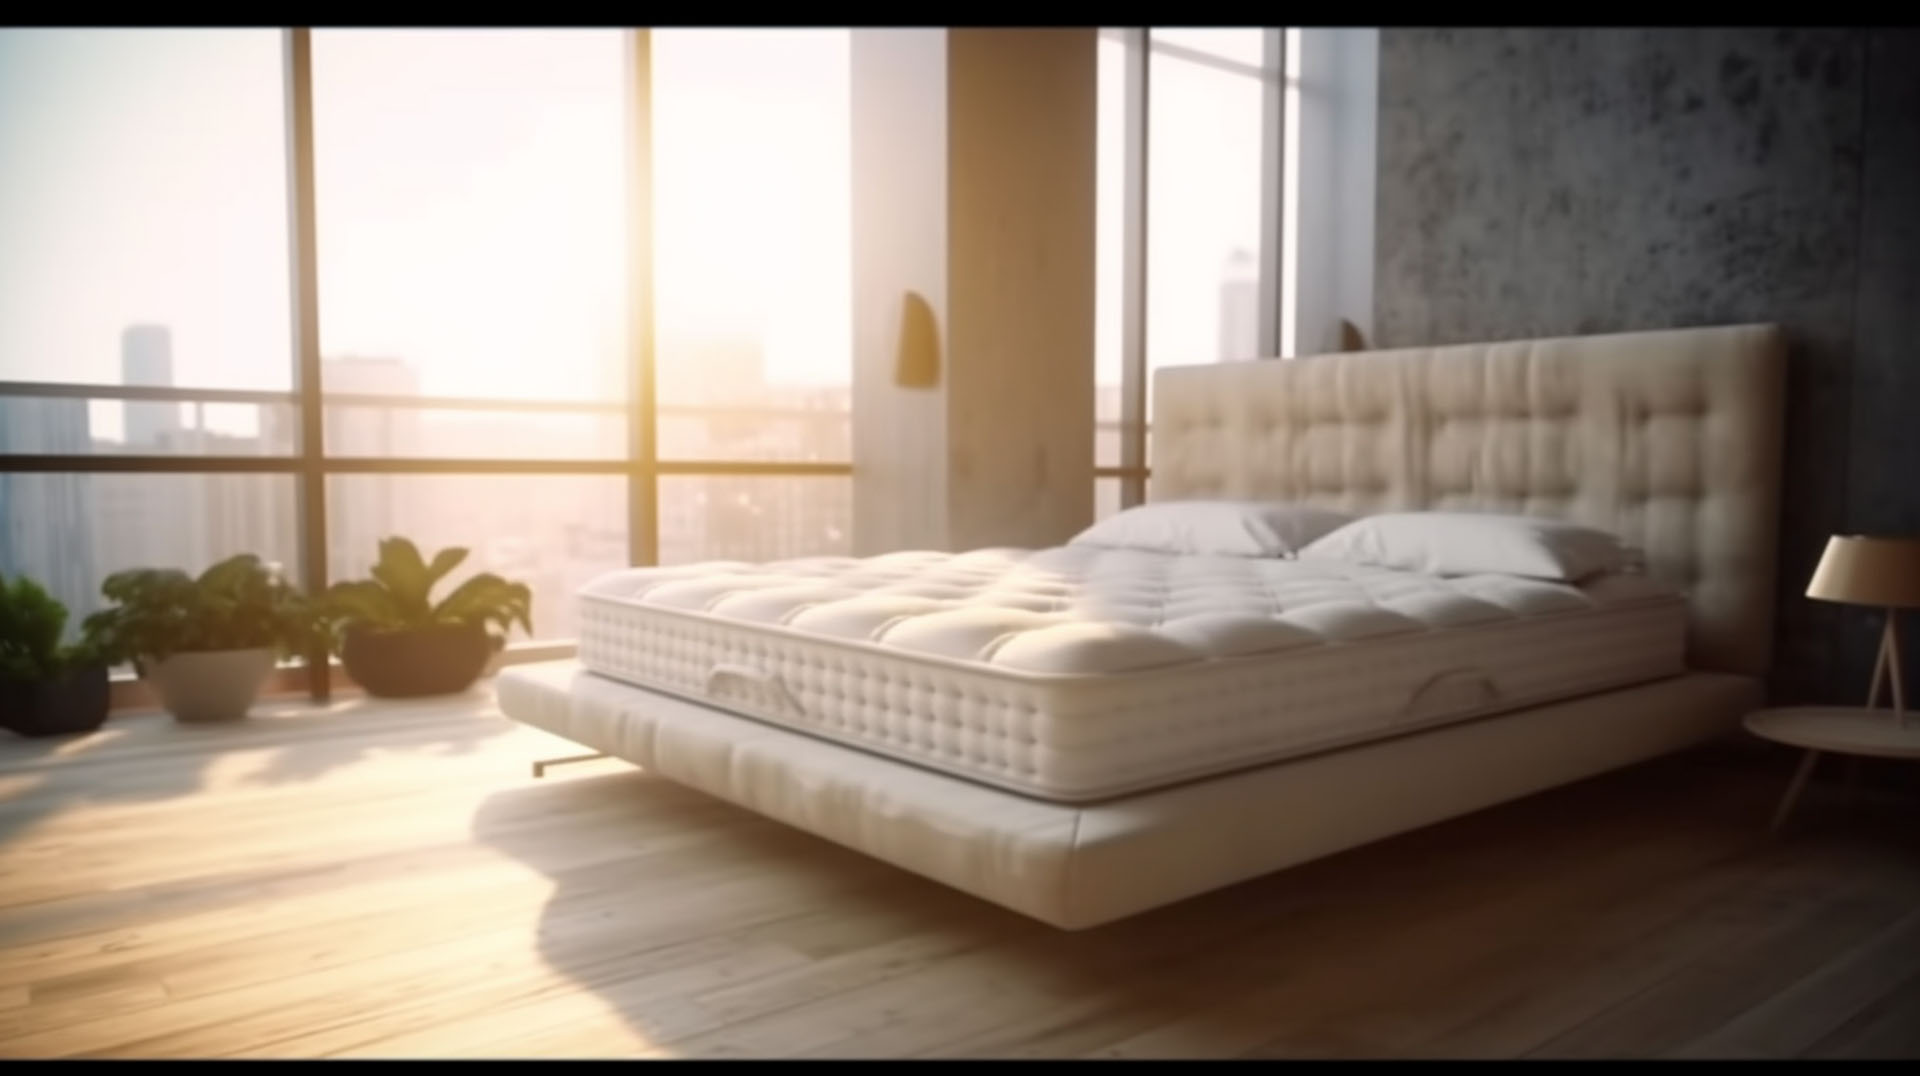 Kansas City organic mattresses are the perfect way to get a good night's sleep without sacrificing comfort or your health